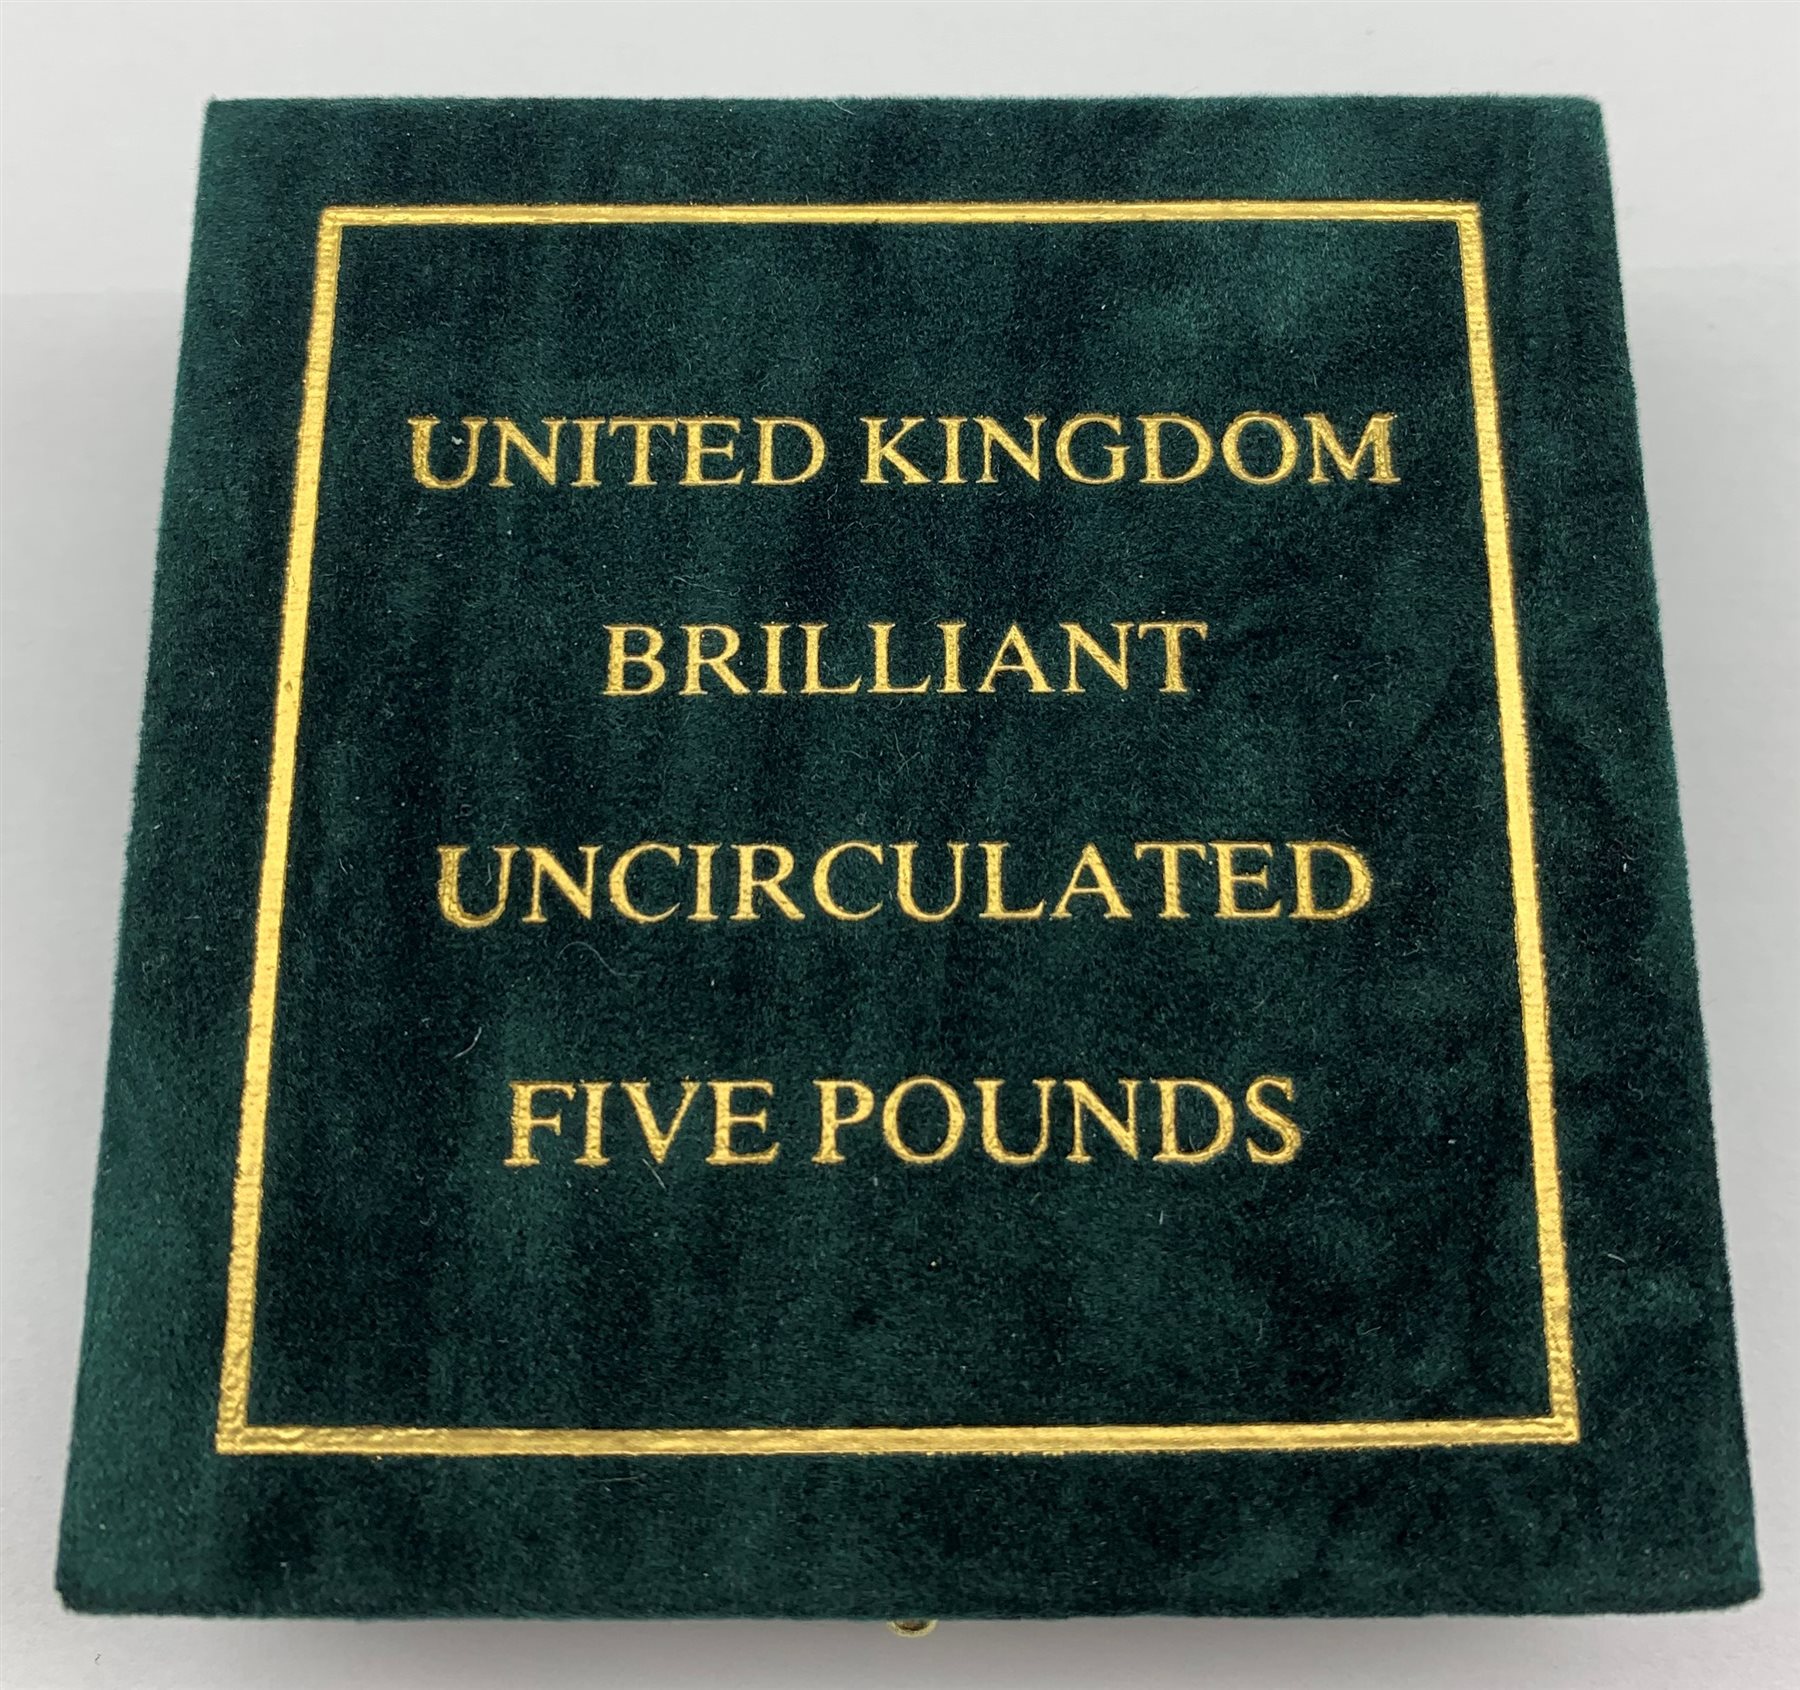 Queen Elizabeth II 1998 brilliant uncirculated gold five pound coin, cased with certificate - Image 3 of 3